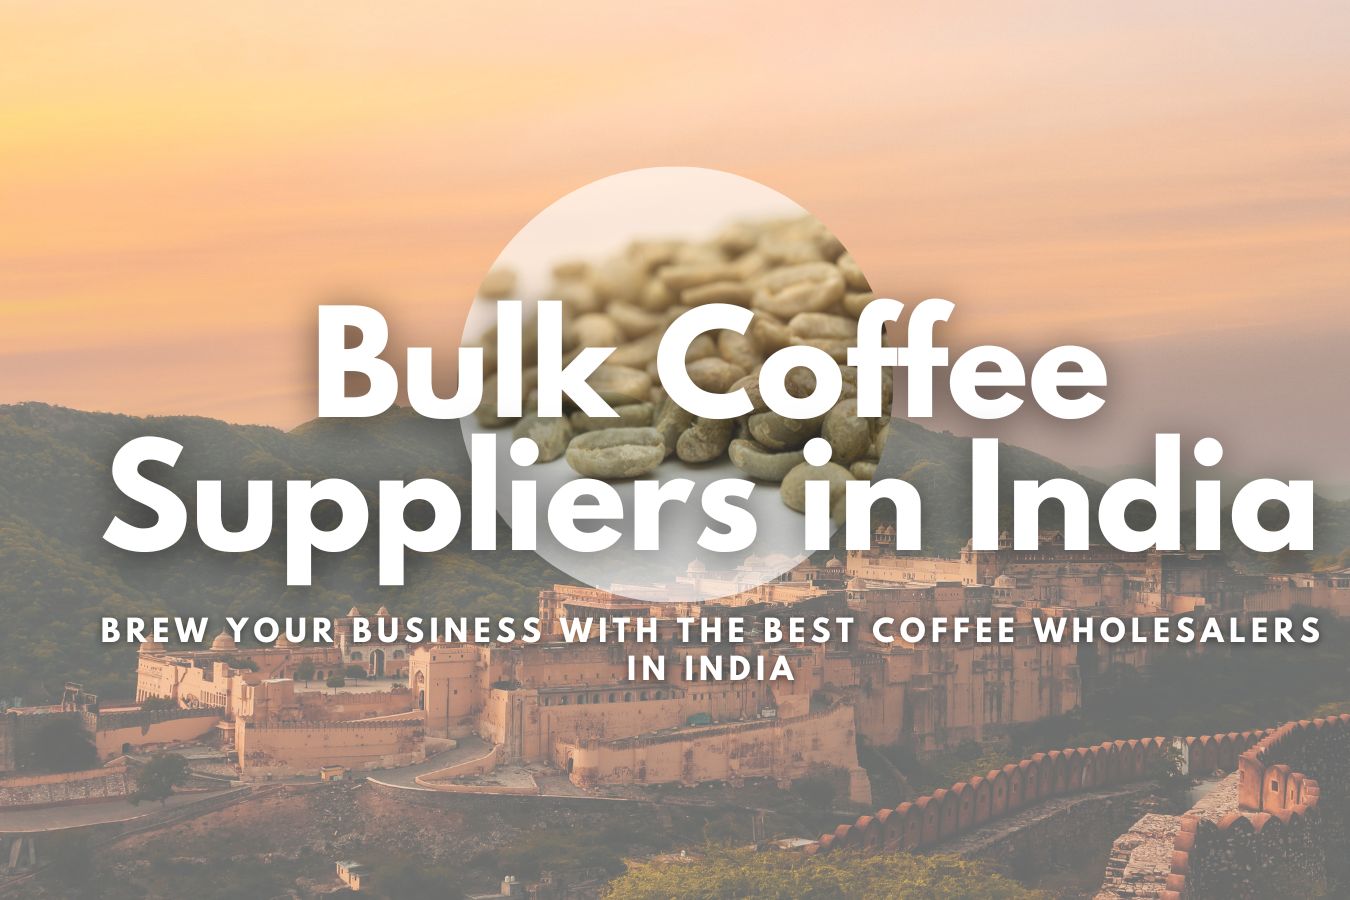 Top Bulk Coffee Suppliers in India Brew Your Business with the Best Coffee Wholesalers in India